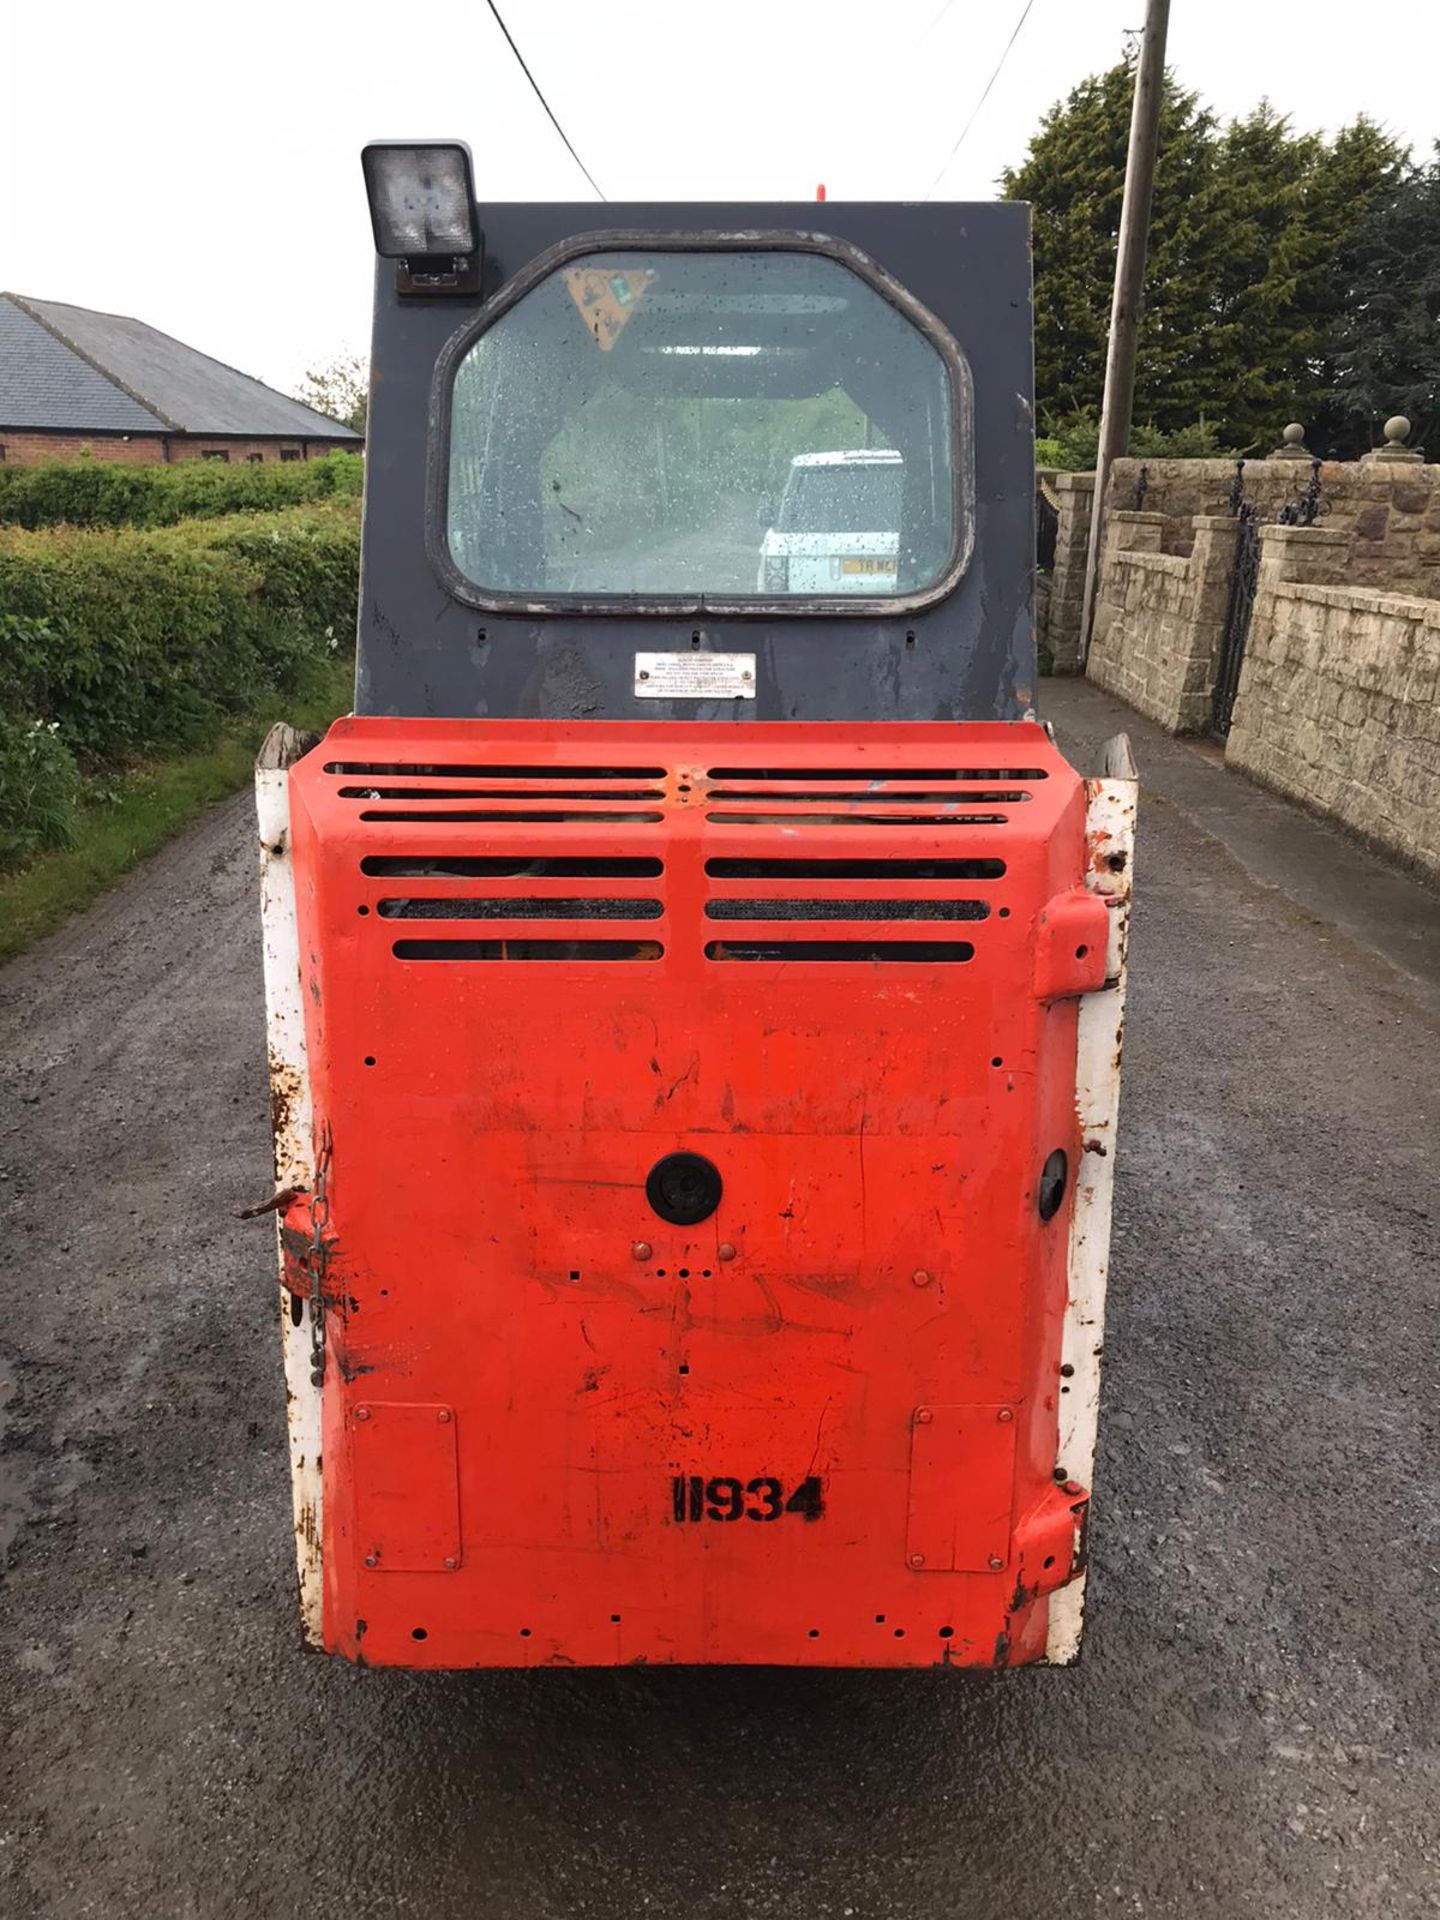 2015 BOBCAT S70 SKID STEER LOADER, 1960 HOURS, 4 IN 1 BUCKET, RUNS, DRIVES AND LIFTS *PLUS VAT* - Image 3 of 5